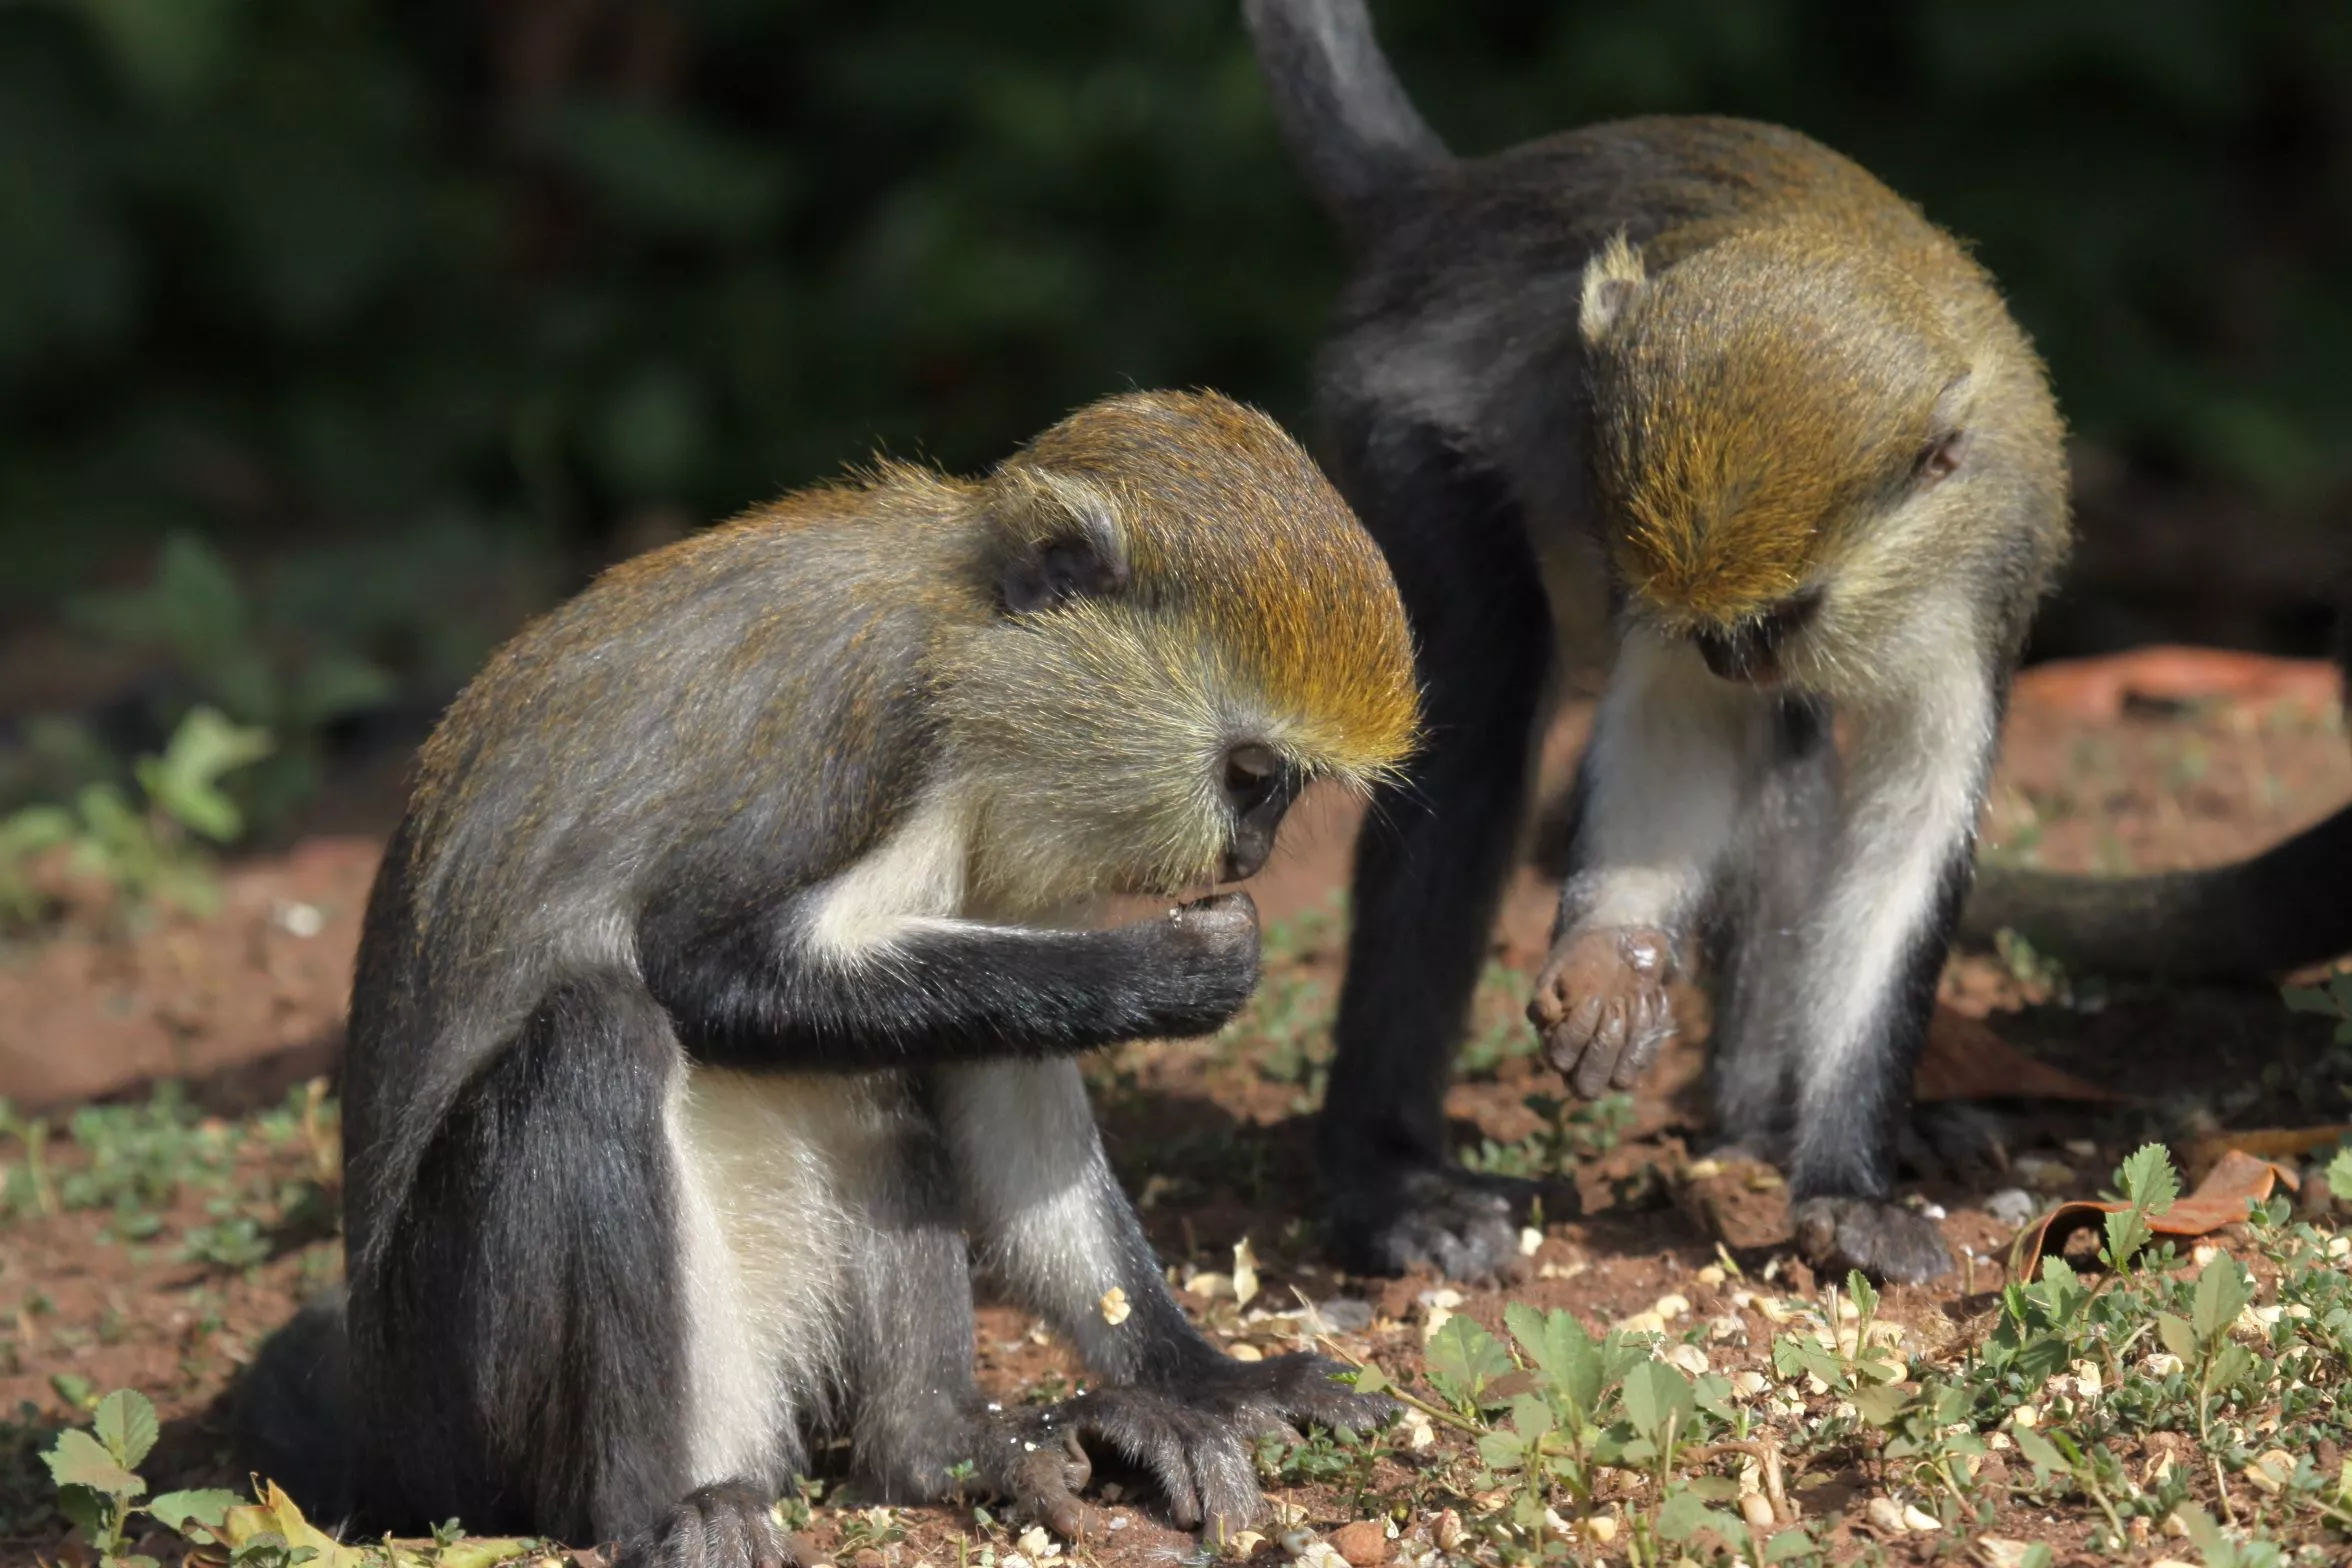 Boabeng-Fiema Monkey Wildlife Sanctuary in Ghana, Africa | Zoos & Sanctuaries - Rated 0.7